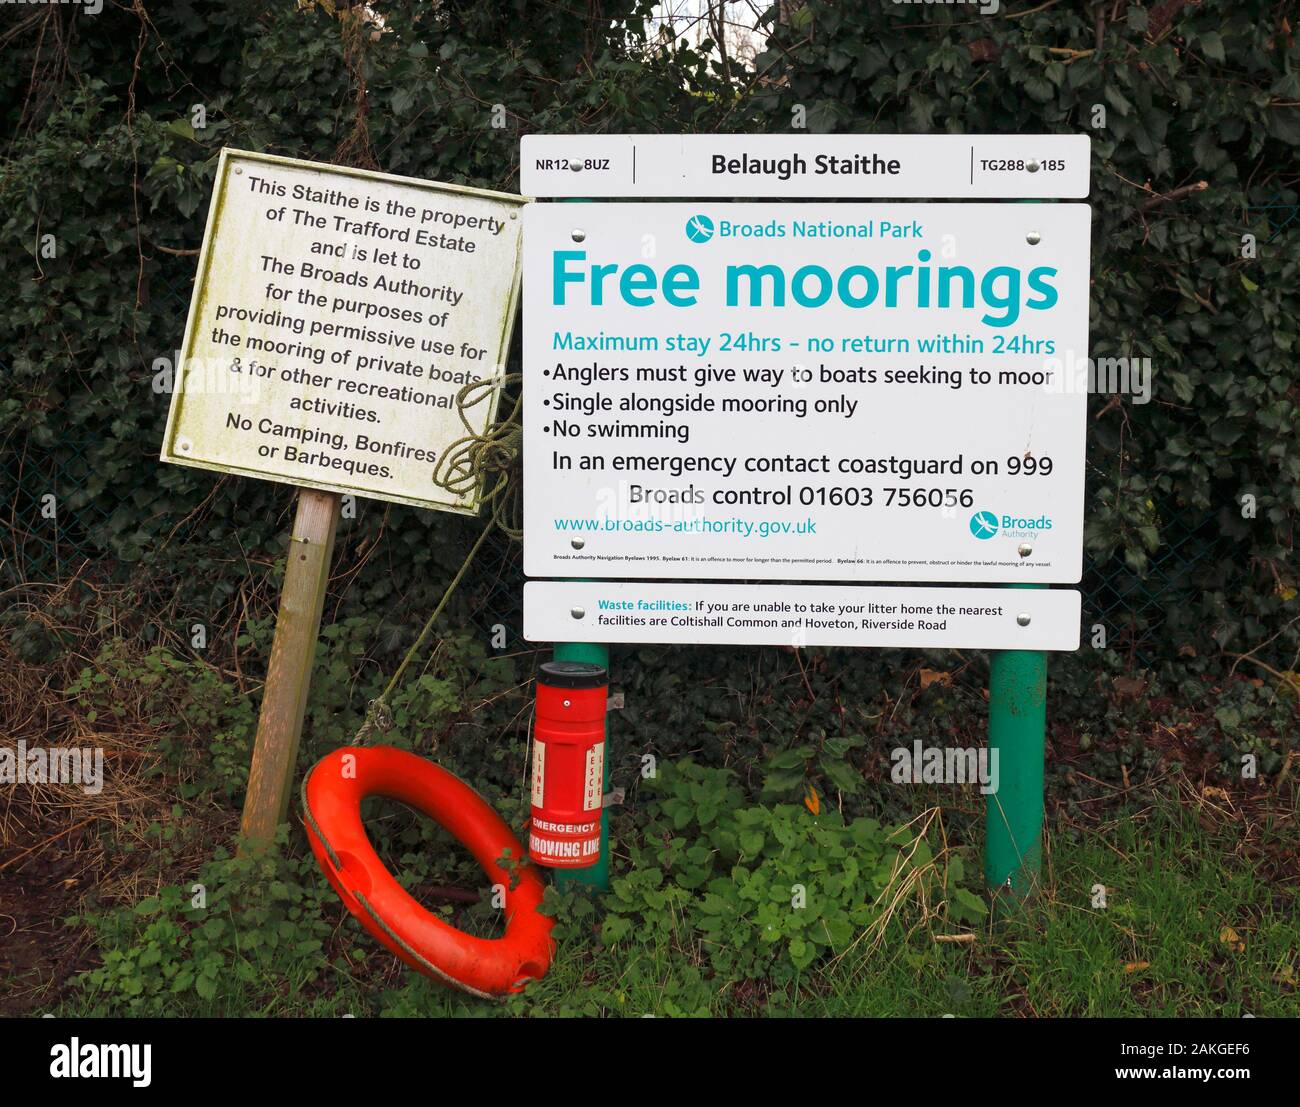 Free Moorings and Property notices by the River Bure on the Norfolk Broads by the Staithe at Belaugh, Norfolk, England, United Kingdom, Europe. Stock Photo